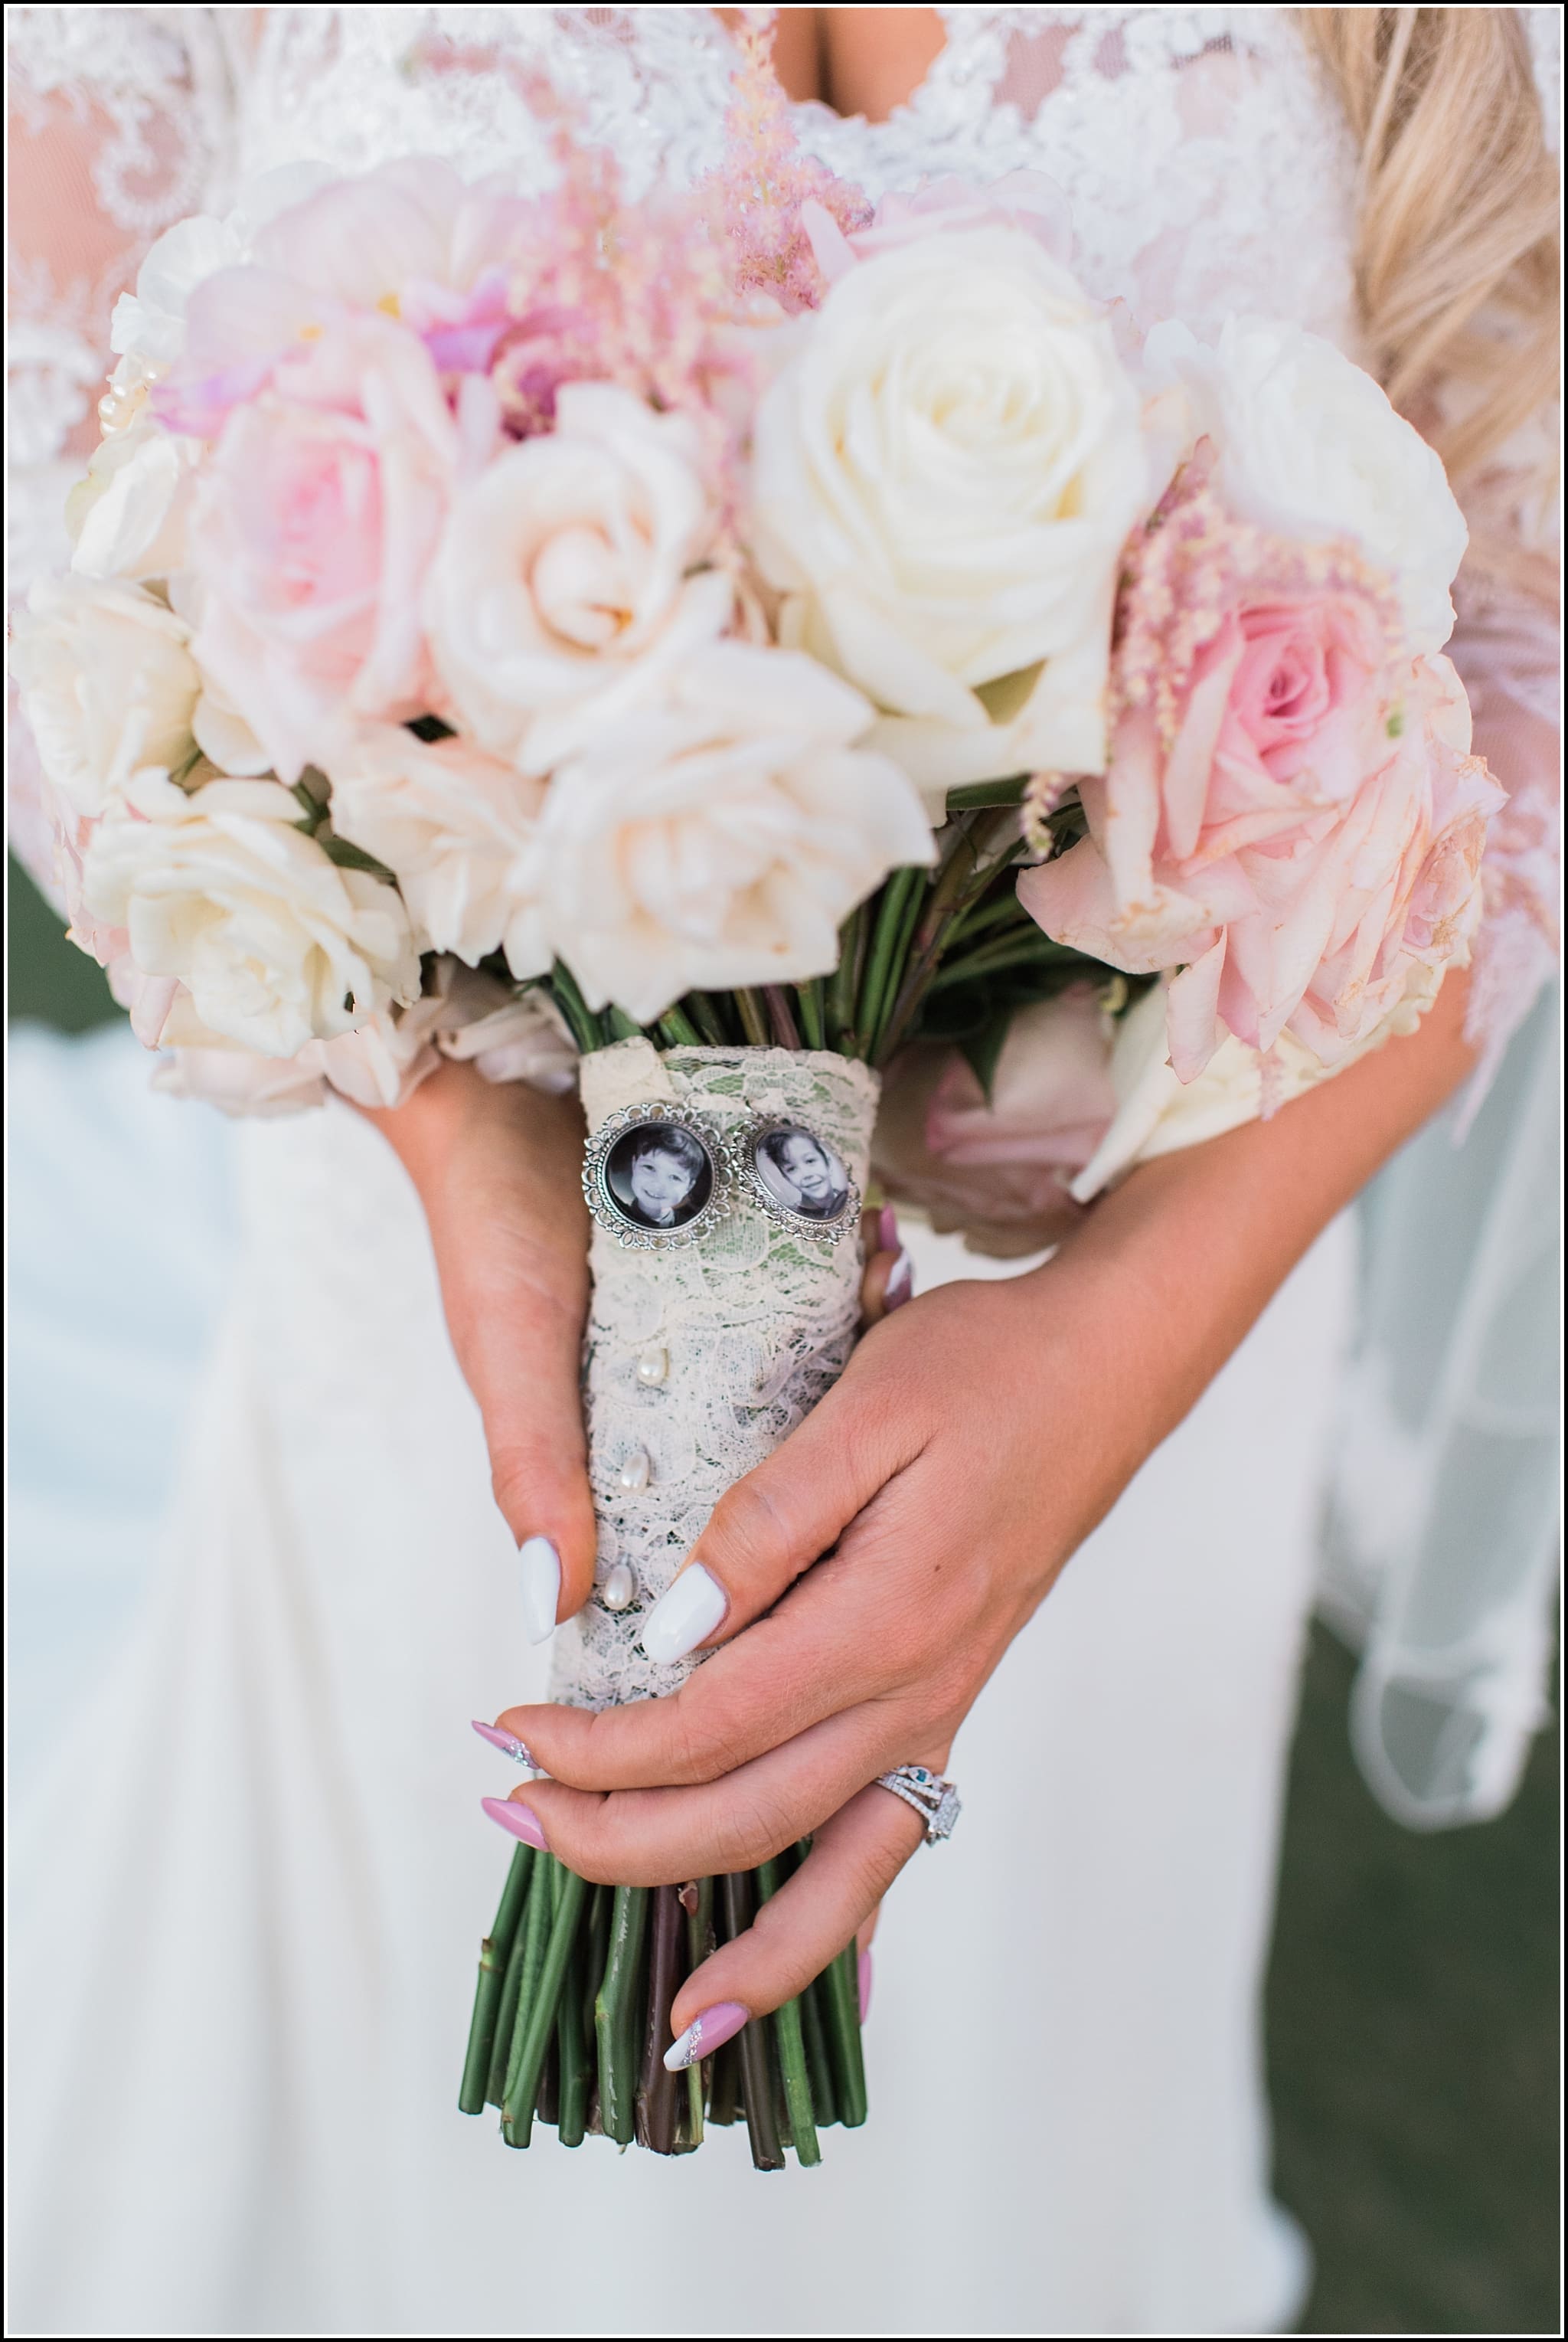 2016 wedding favorites, favorite wedding photos 2016, bouquet, bridal bouquet, bouquet with photos, ways to honor people at wedding